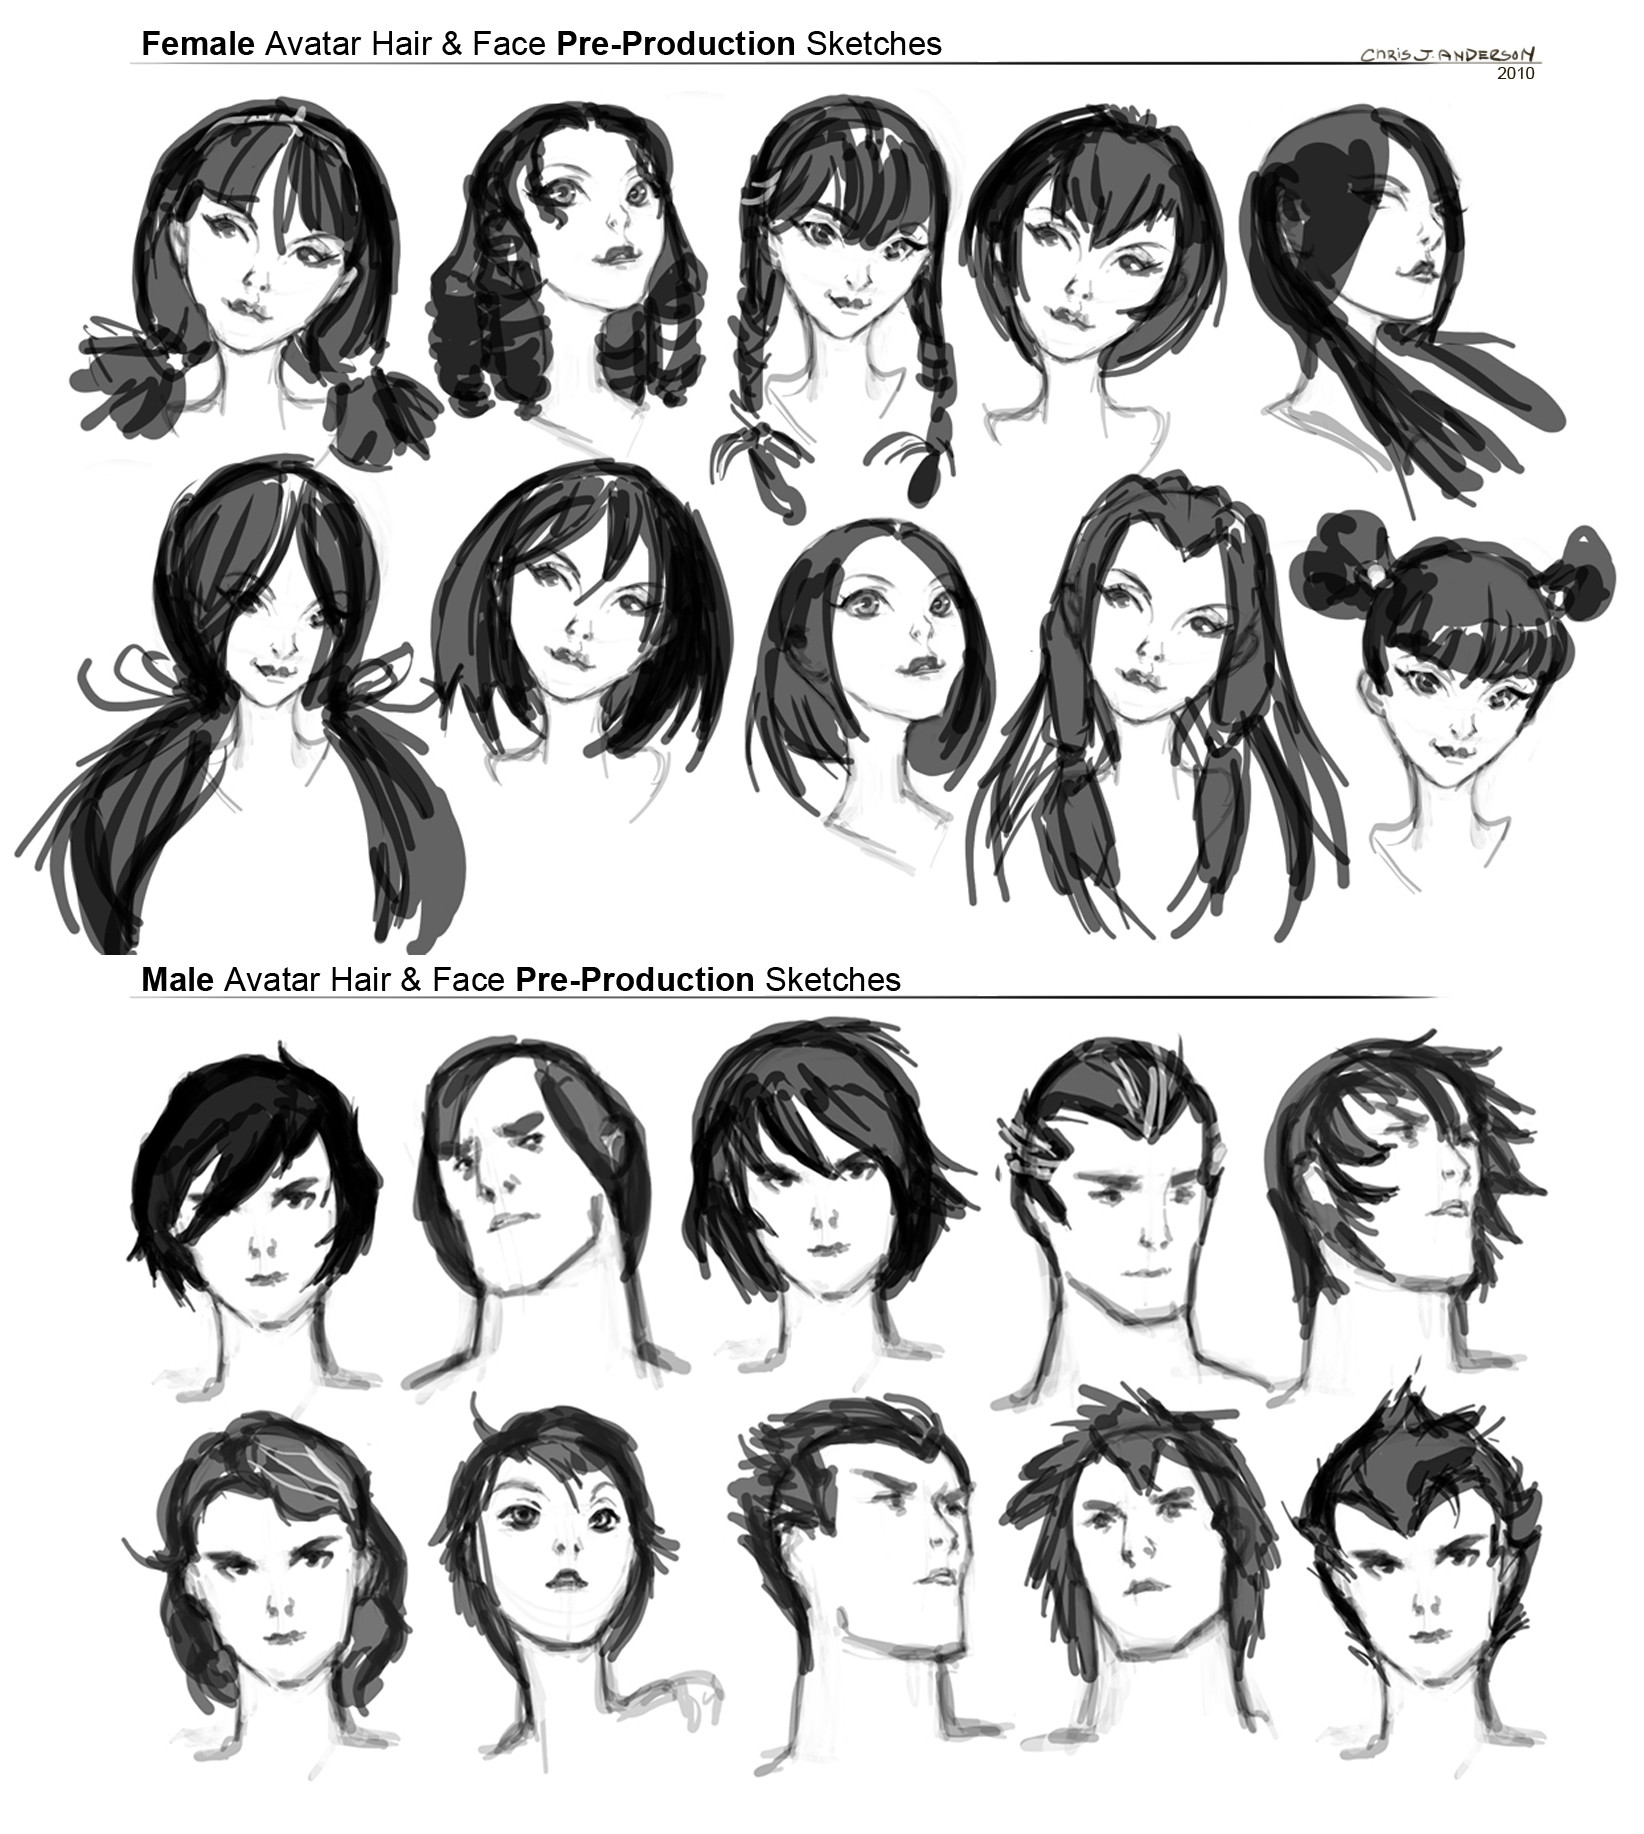 ArtStation - Female and Male Face and Hair Exploration - Pre-Production